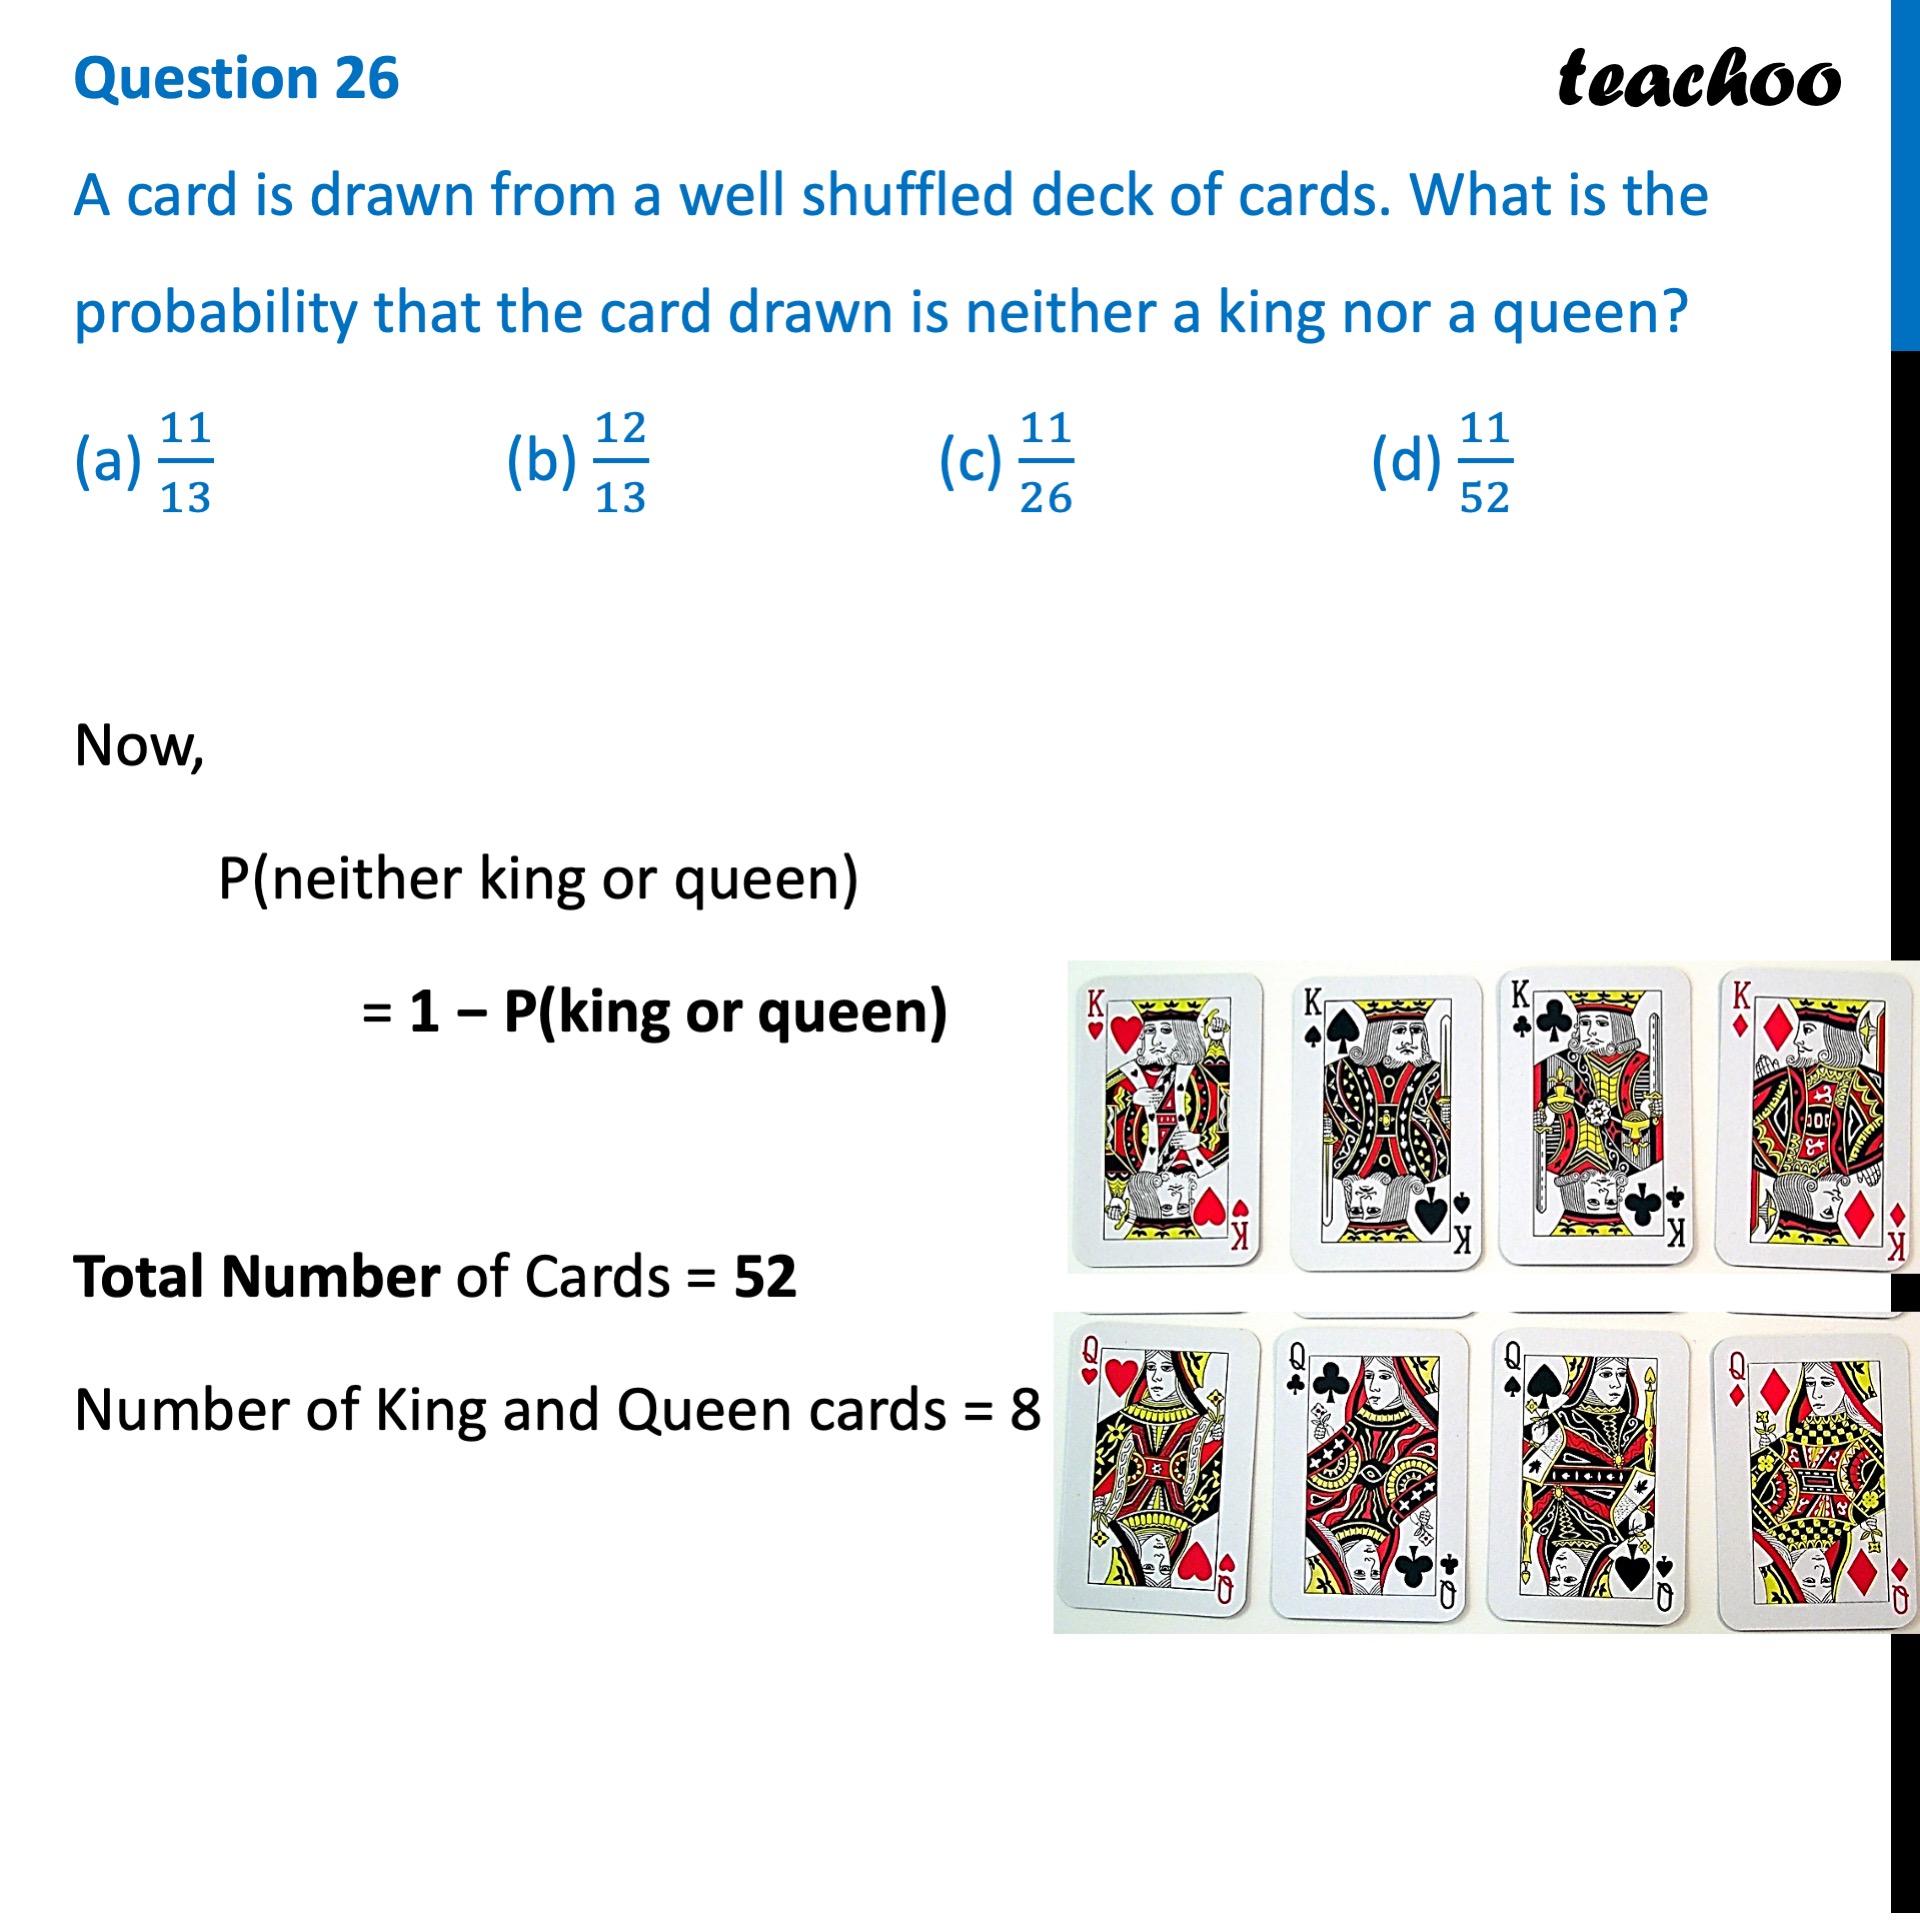 ques-26-mcq-a-card-is-drawn-from-a-well-shuffled-deck-of-cards